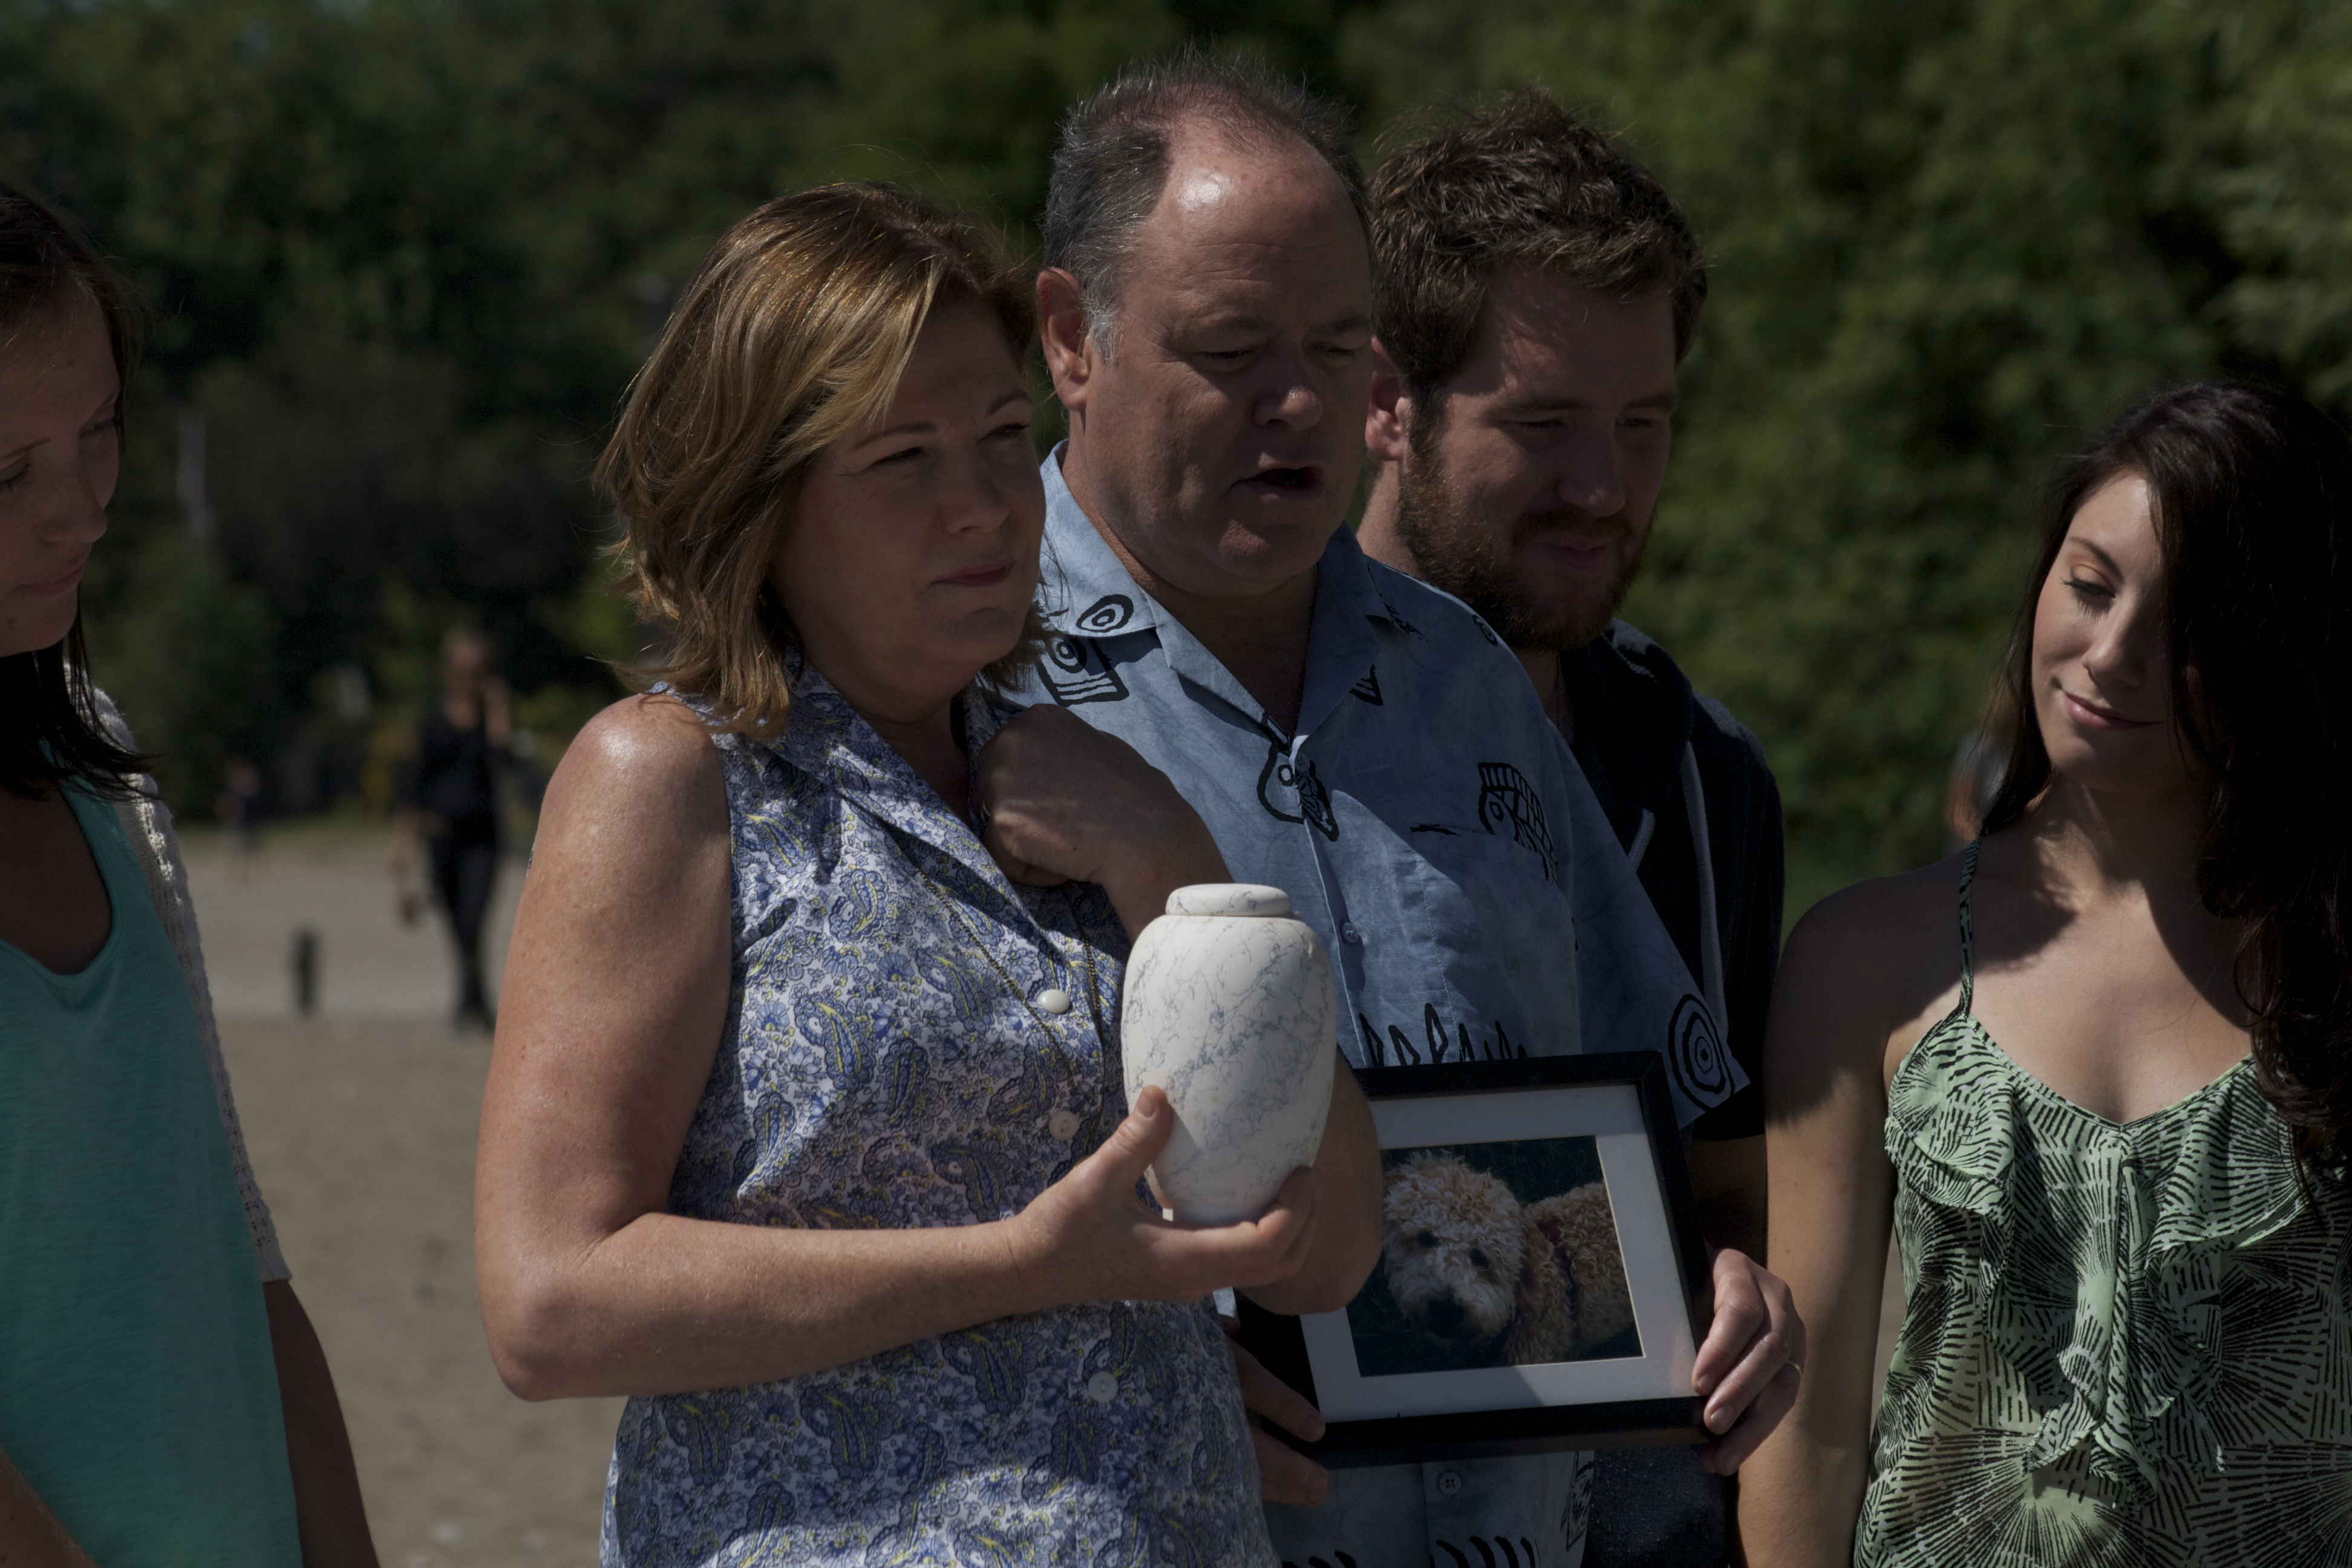 Deanna Little (right), Cuyler Foster, David Huband, Christina Collins, and Jenny Taylor (left) in After Lola